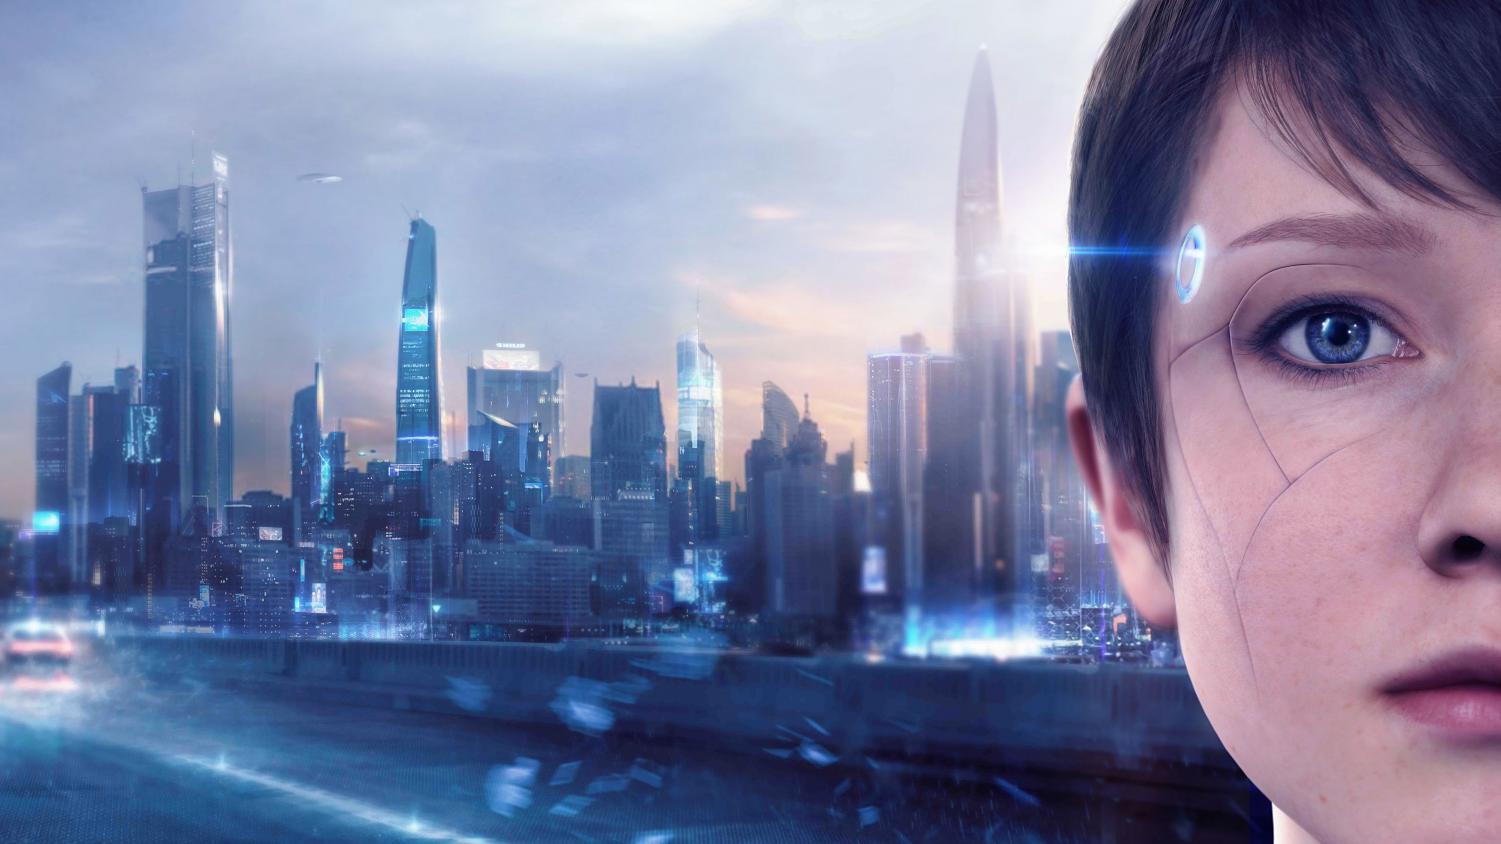 Detroit: Become Human” – A Look Into the Future – The Boulevard Online